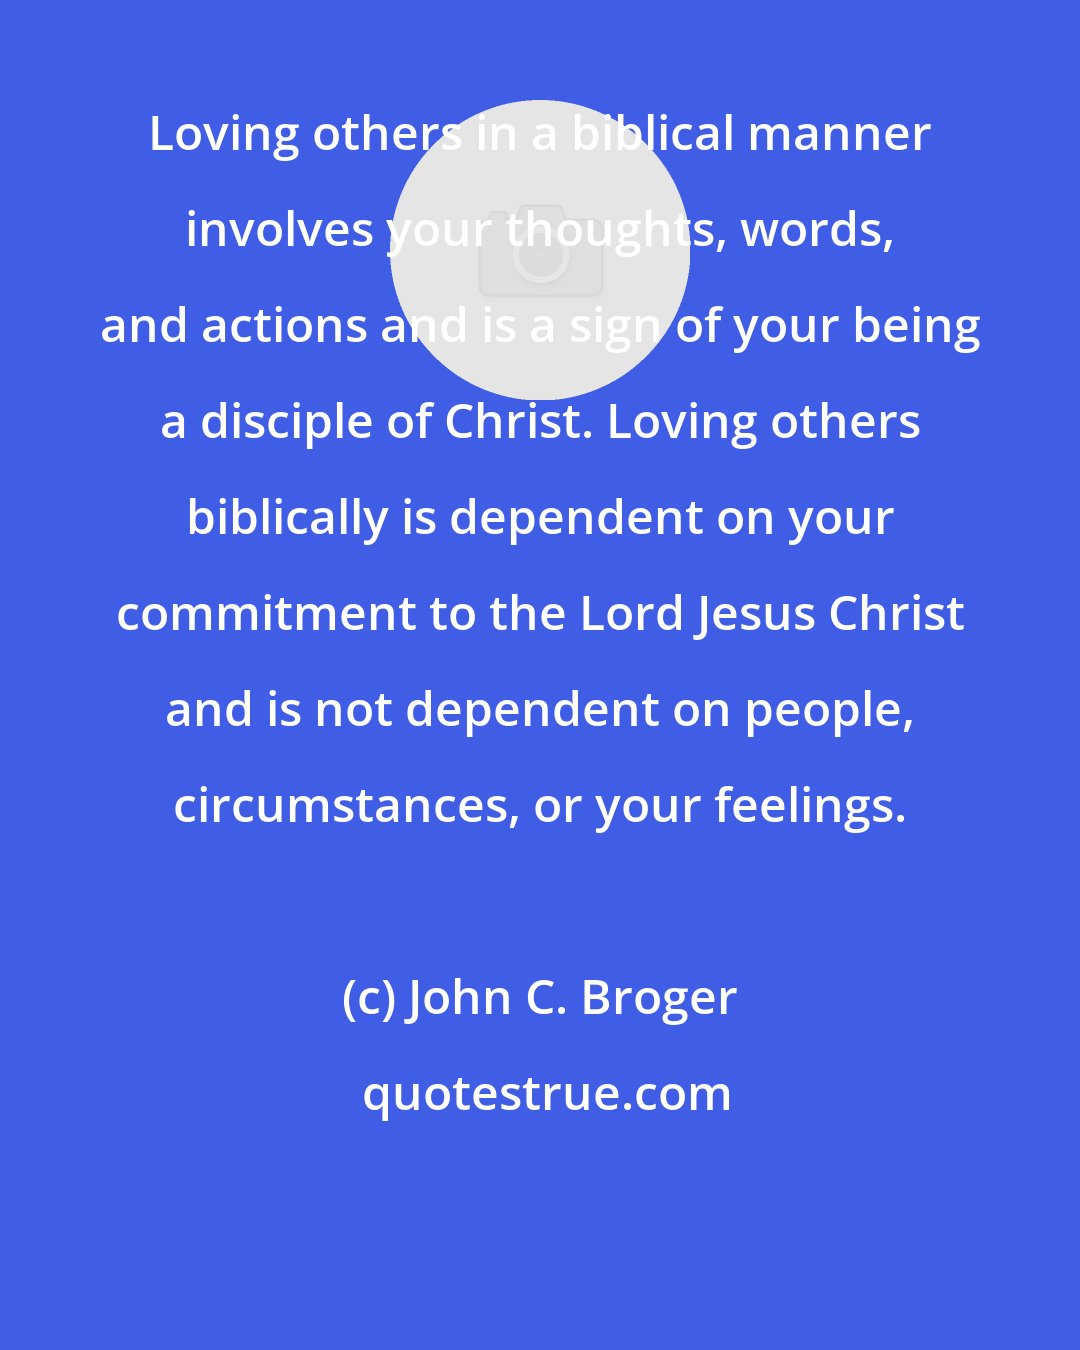 John C. Broger: Loving others in a biblical manner involves your thoughts, words, and actions and is a sign of your being a disciple of Christ. Loving others biblically is dependent on your commitment to the Lord Jesus Christ and is not dependent on people, circumstances, or your feelings.